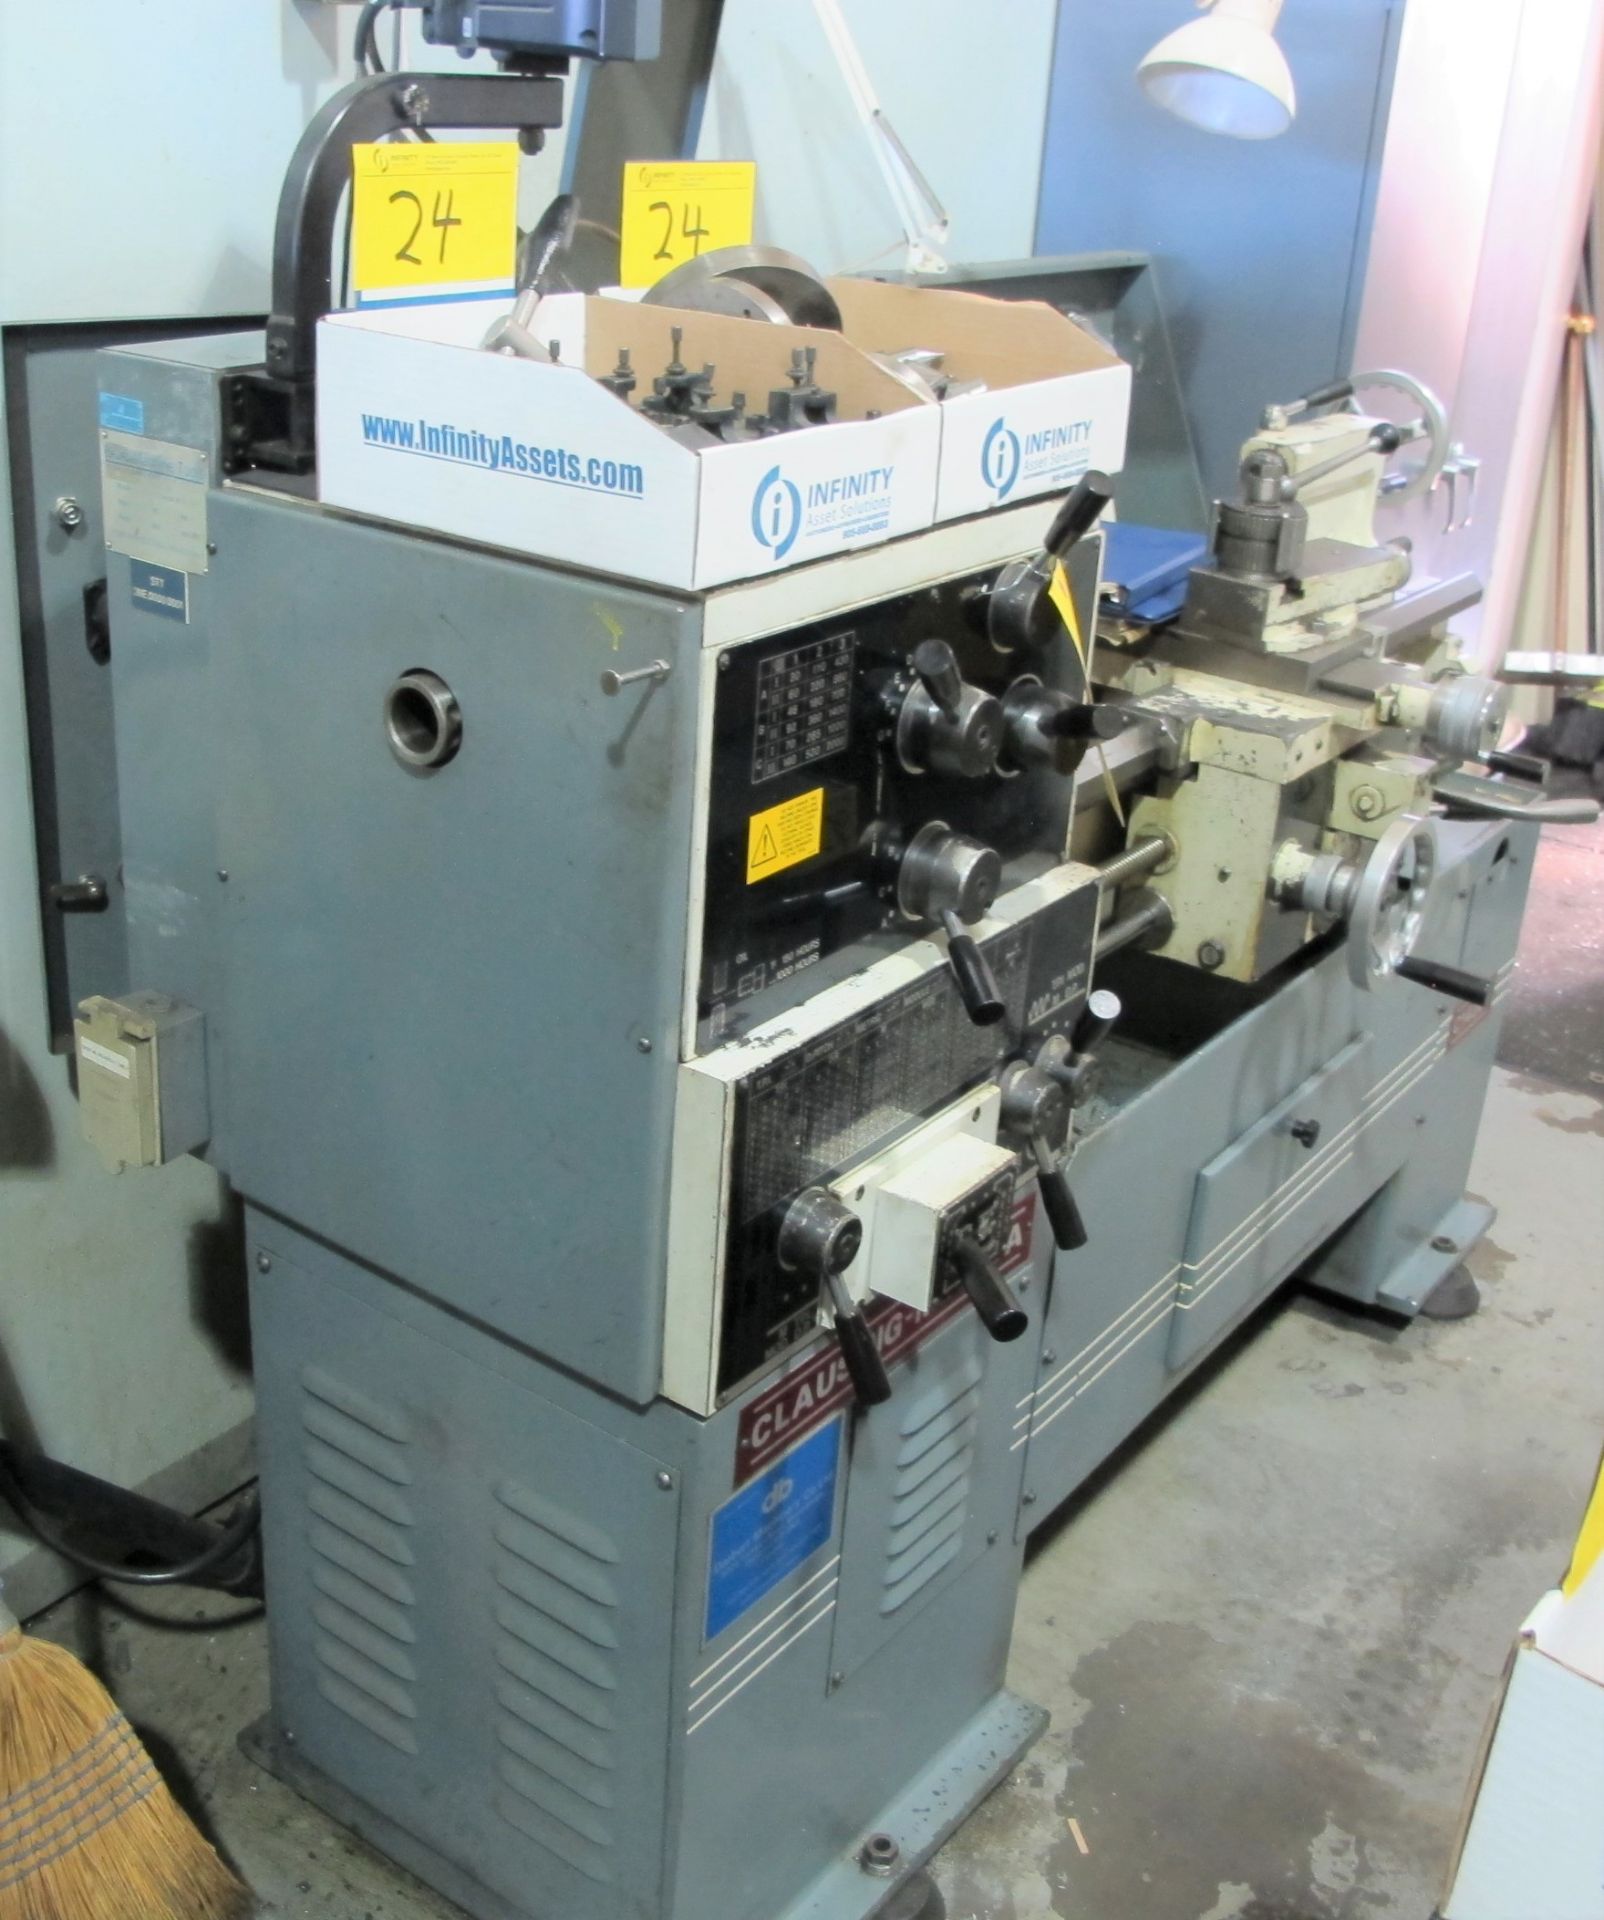 CLAUSING-METOSA C1430S LATHE, 8" 3-JAW CHUCK, ACURITE 2-AXIS DRO, 14” X 30”, SPEEDS TO 2,000 RPM, - Image 2 of 7